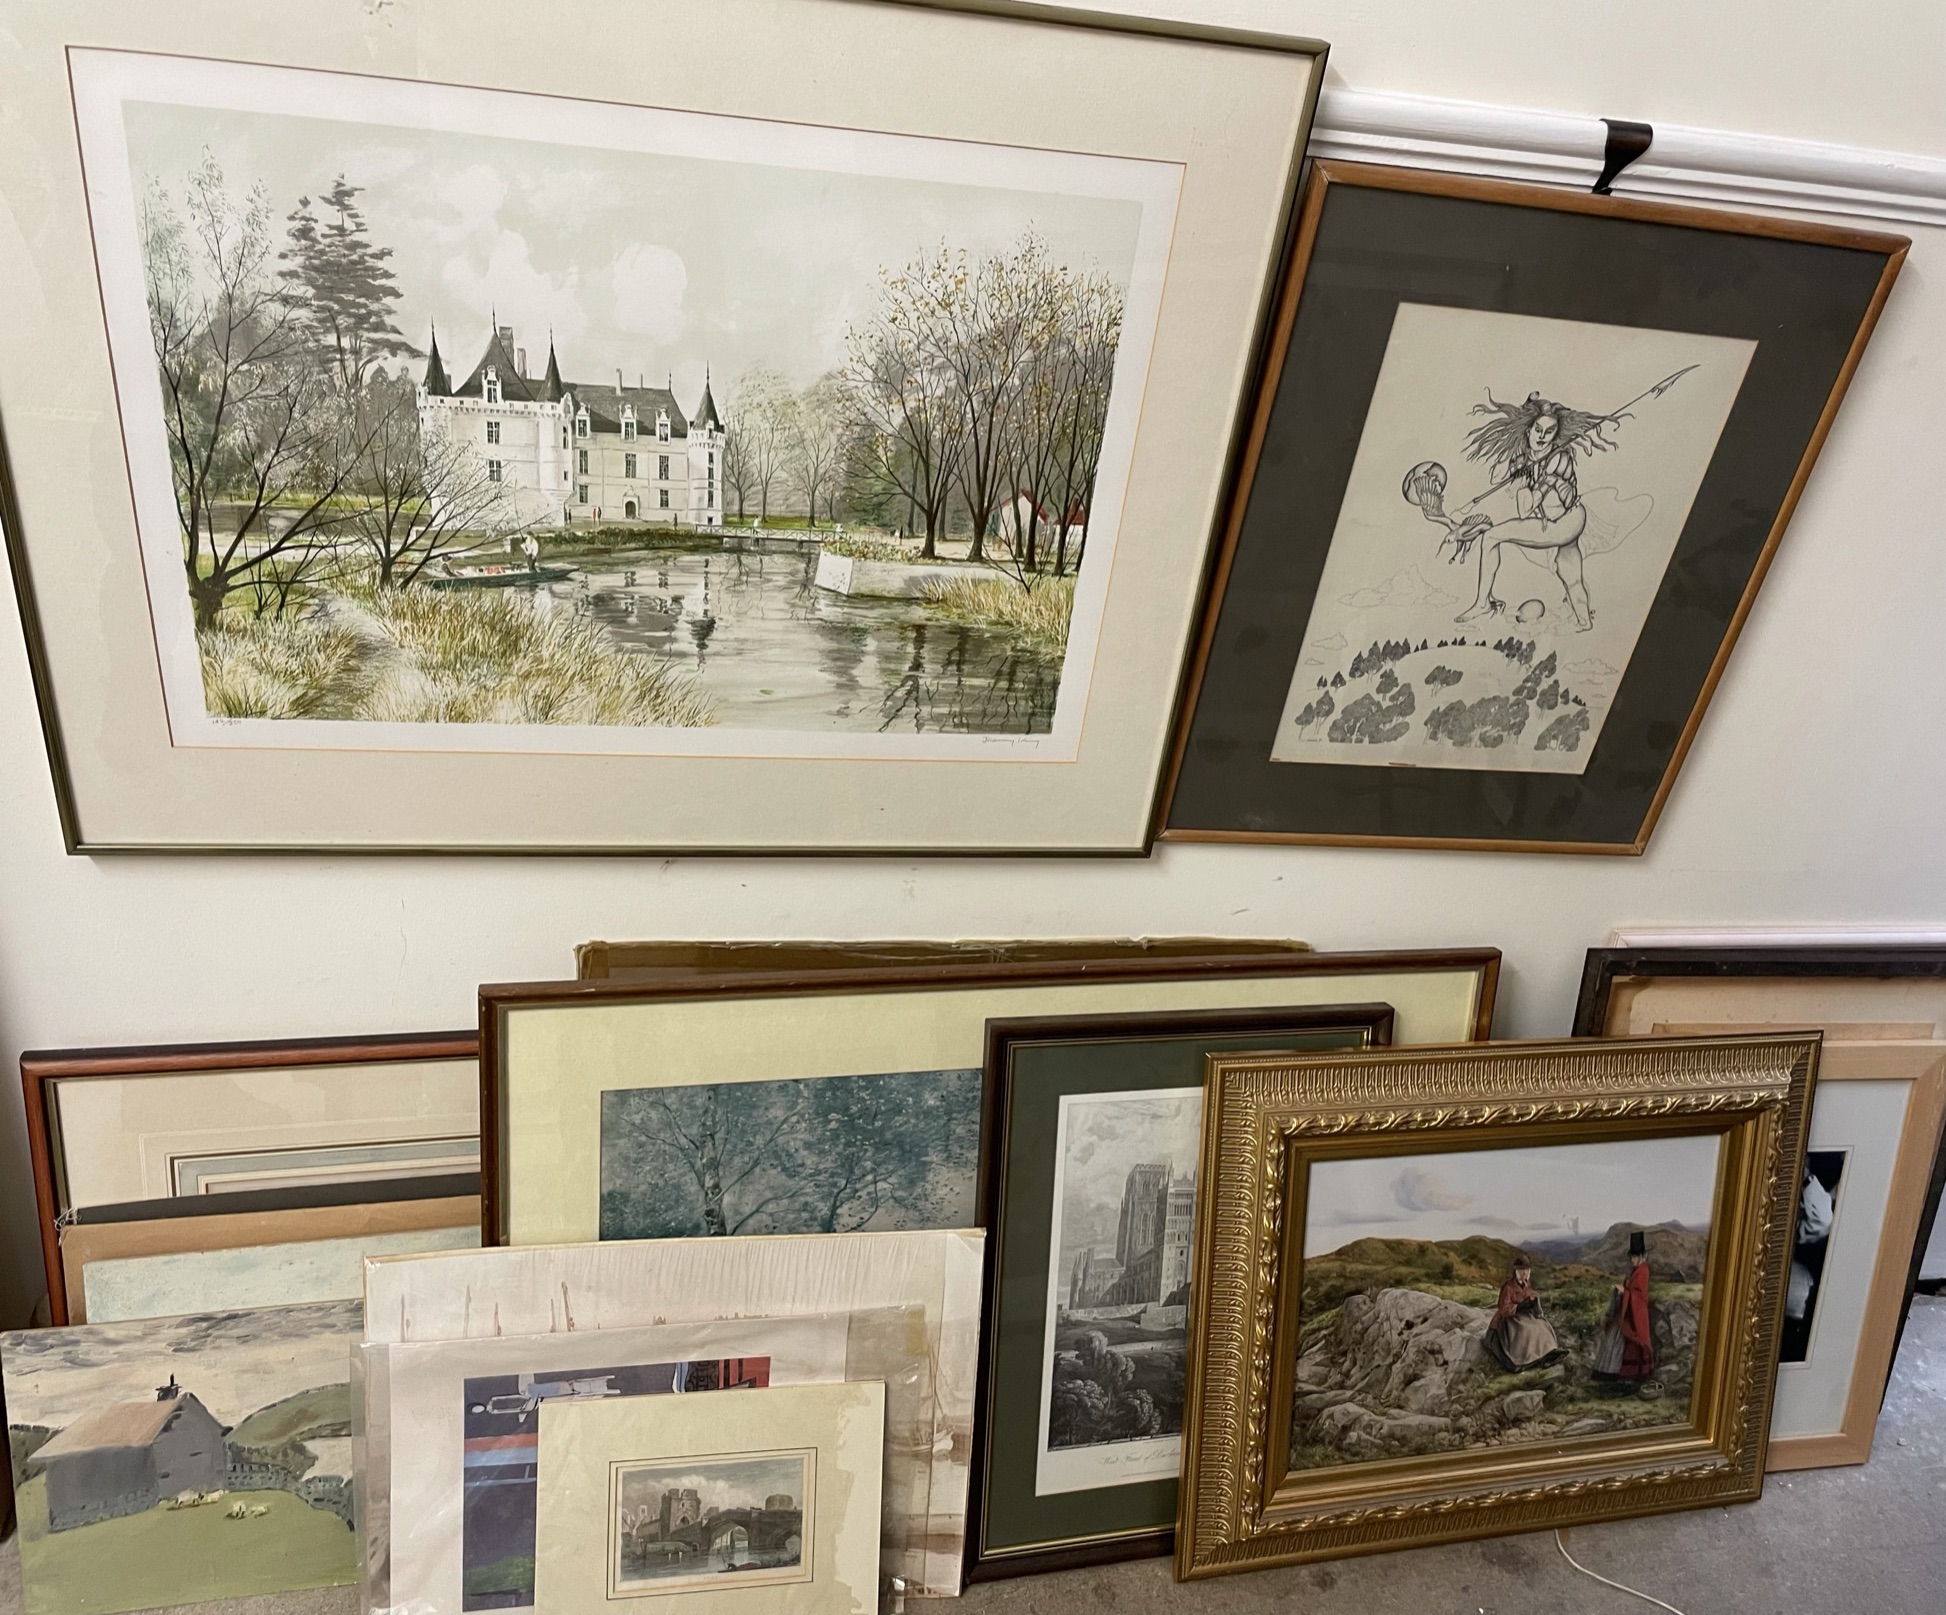 Jeremy King A chateau A limited edition print Signed in pencil to the margin Together with a large